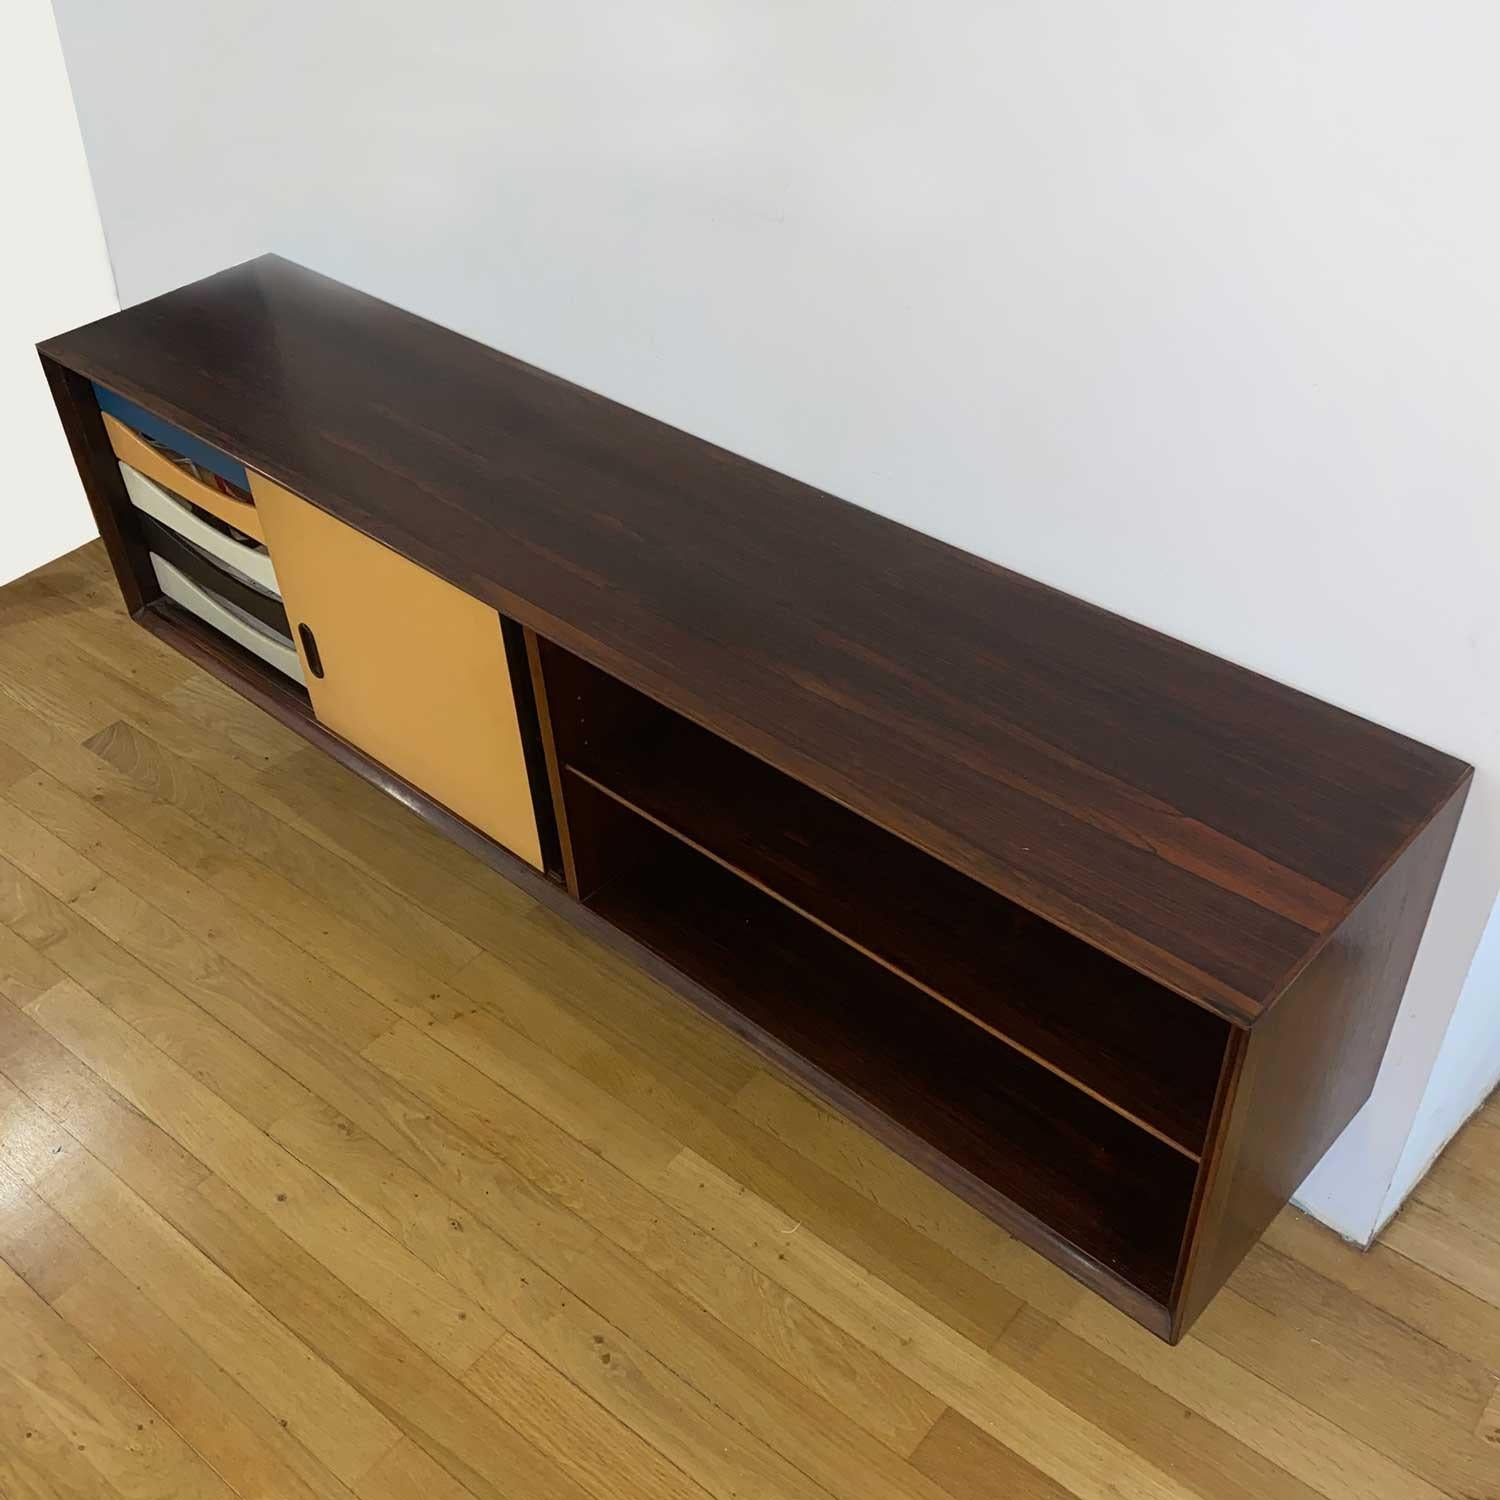 Arne Vodder wall rosewood sideboard In Excellent Condition For Sale In Grenoble, FR